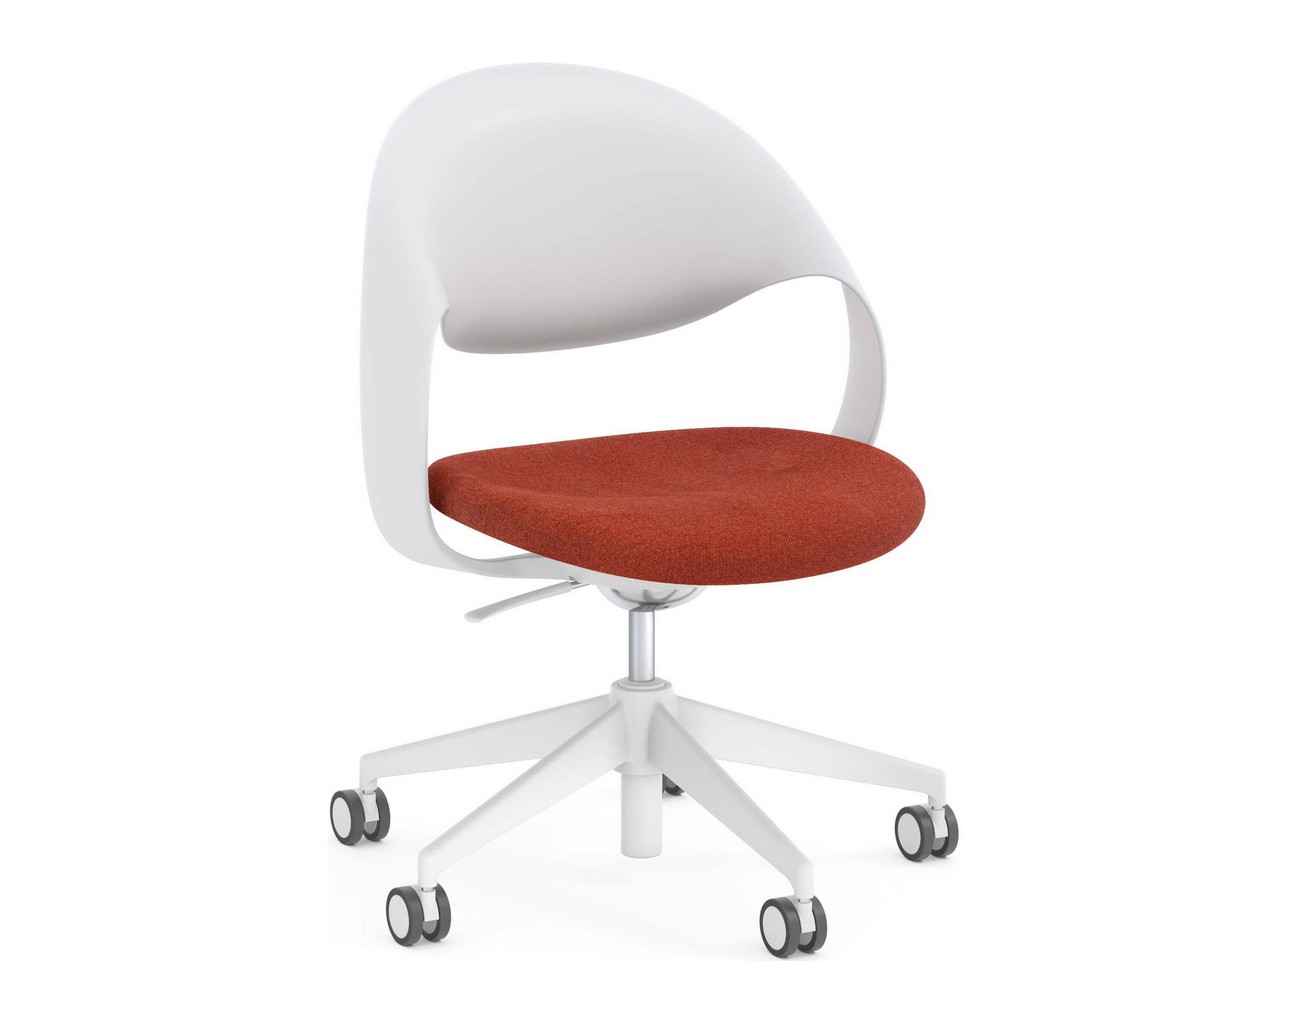 Loop Multi-Purpose Chair – White Frame with Red Seat